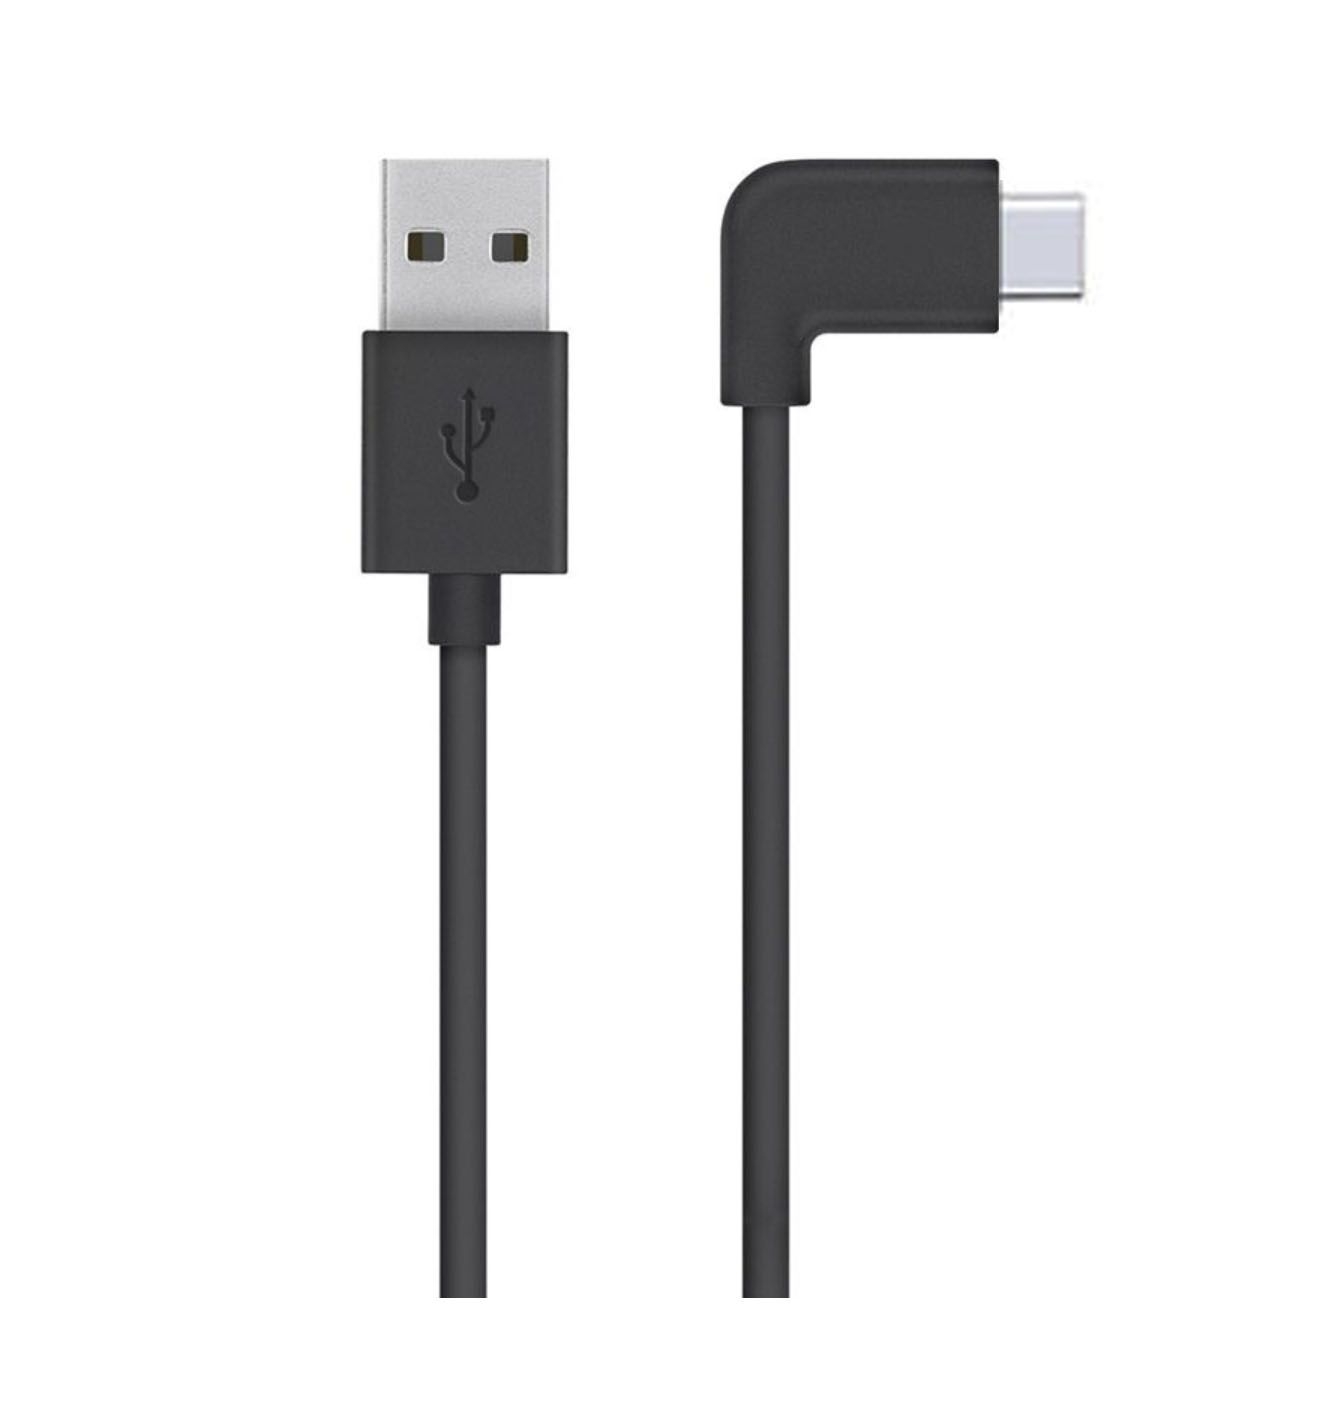 USB Type-C charge cable. Three metres in length with angled head